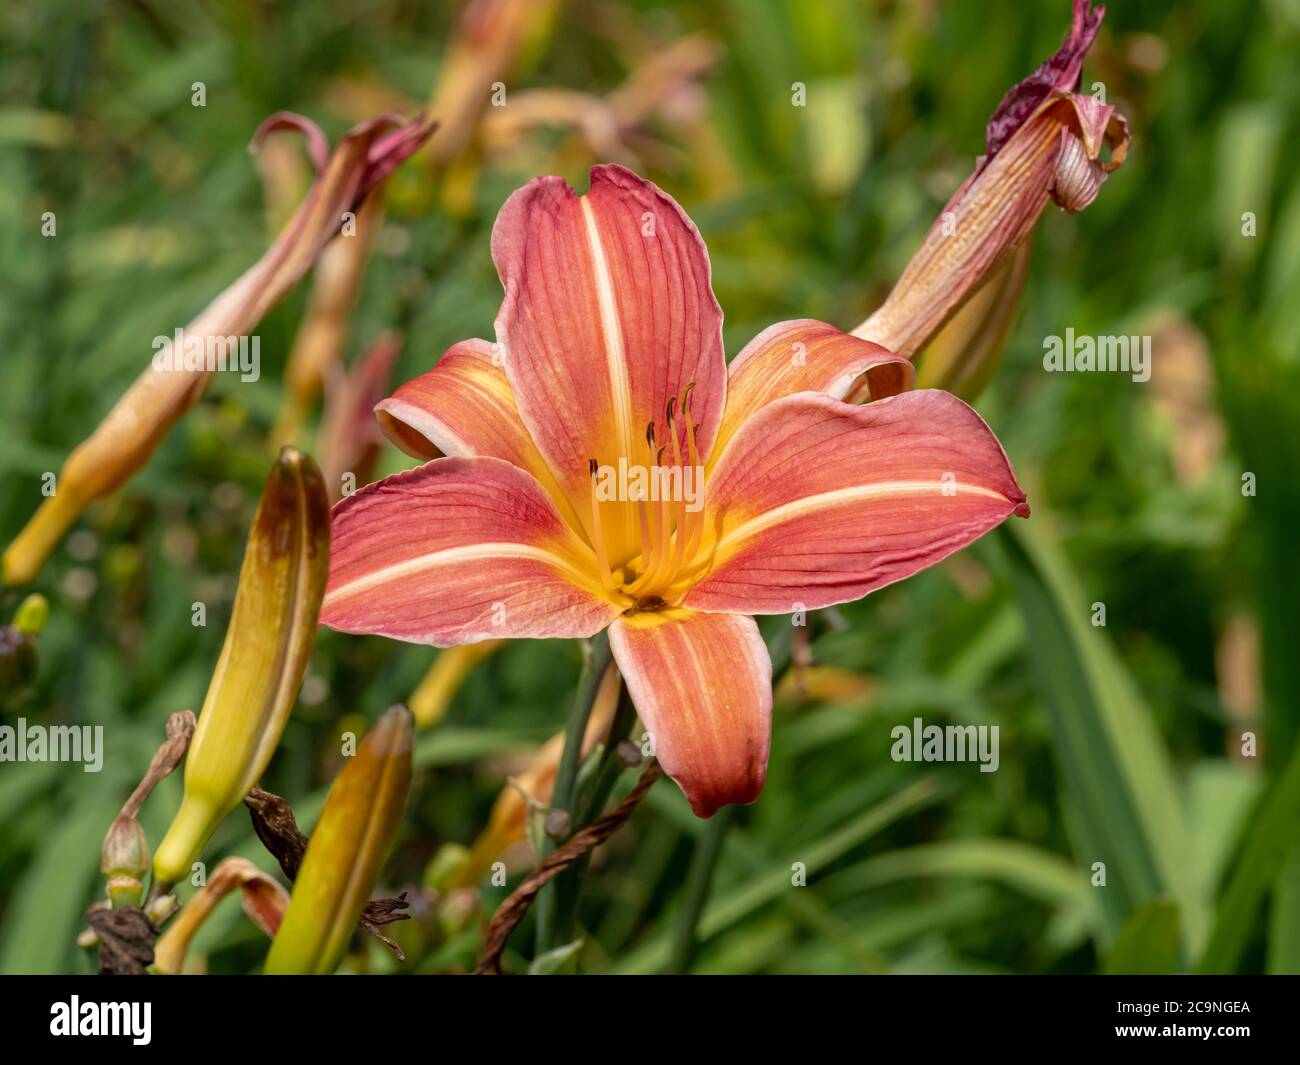 Closeup of a pink and yellow Hemerocallis daylily flower, variety Neyron Rose, in a garden Stock Photo